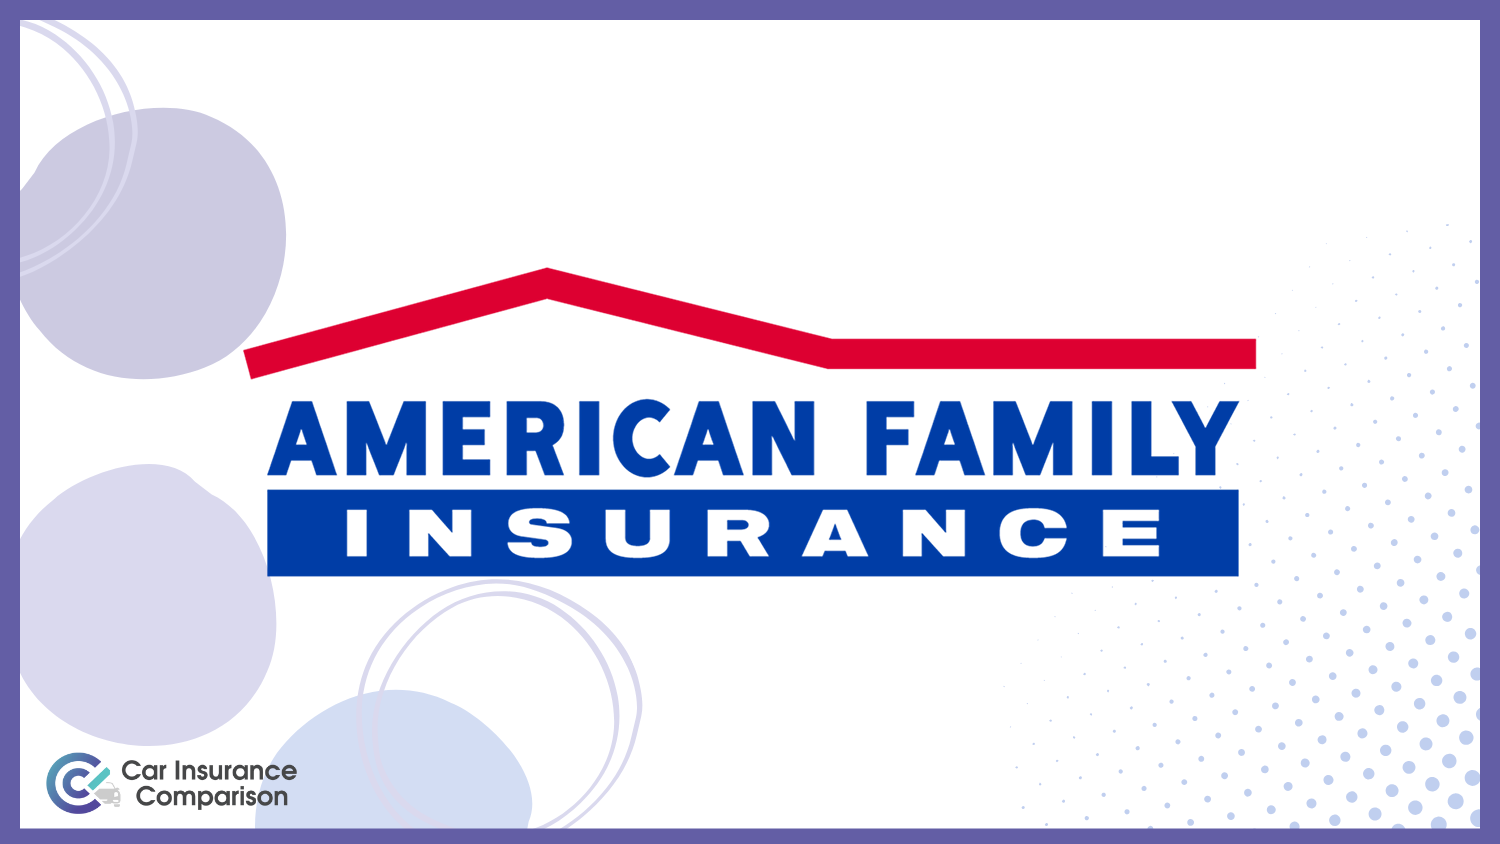 American Family: Cheap Car Insurance for Station Wagons